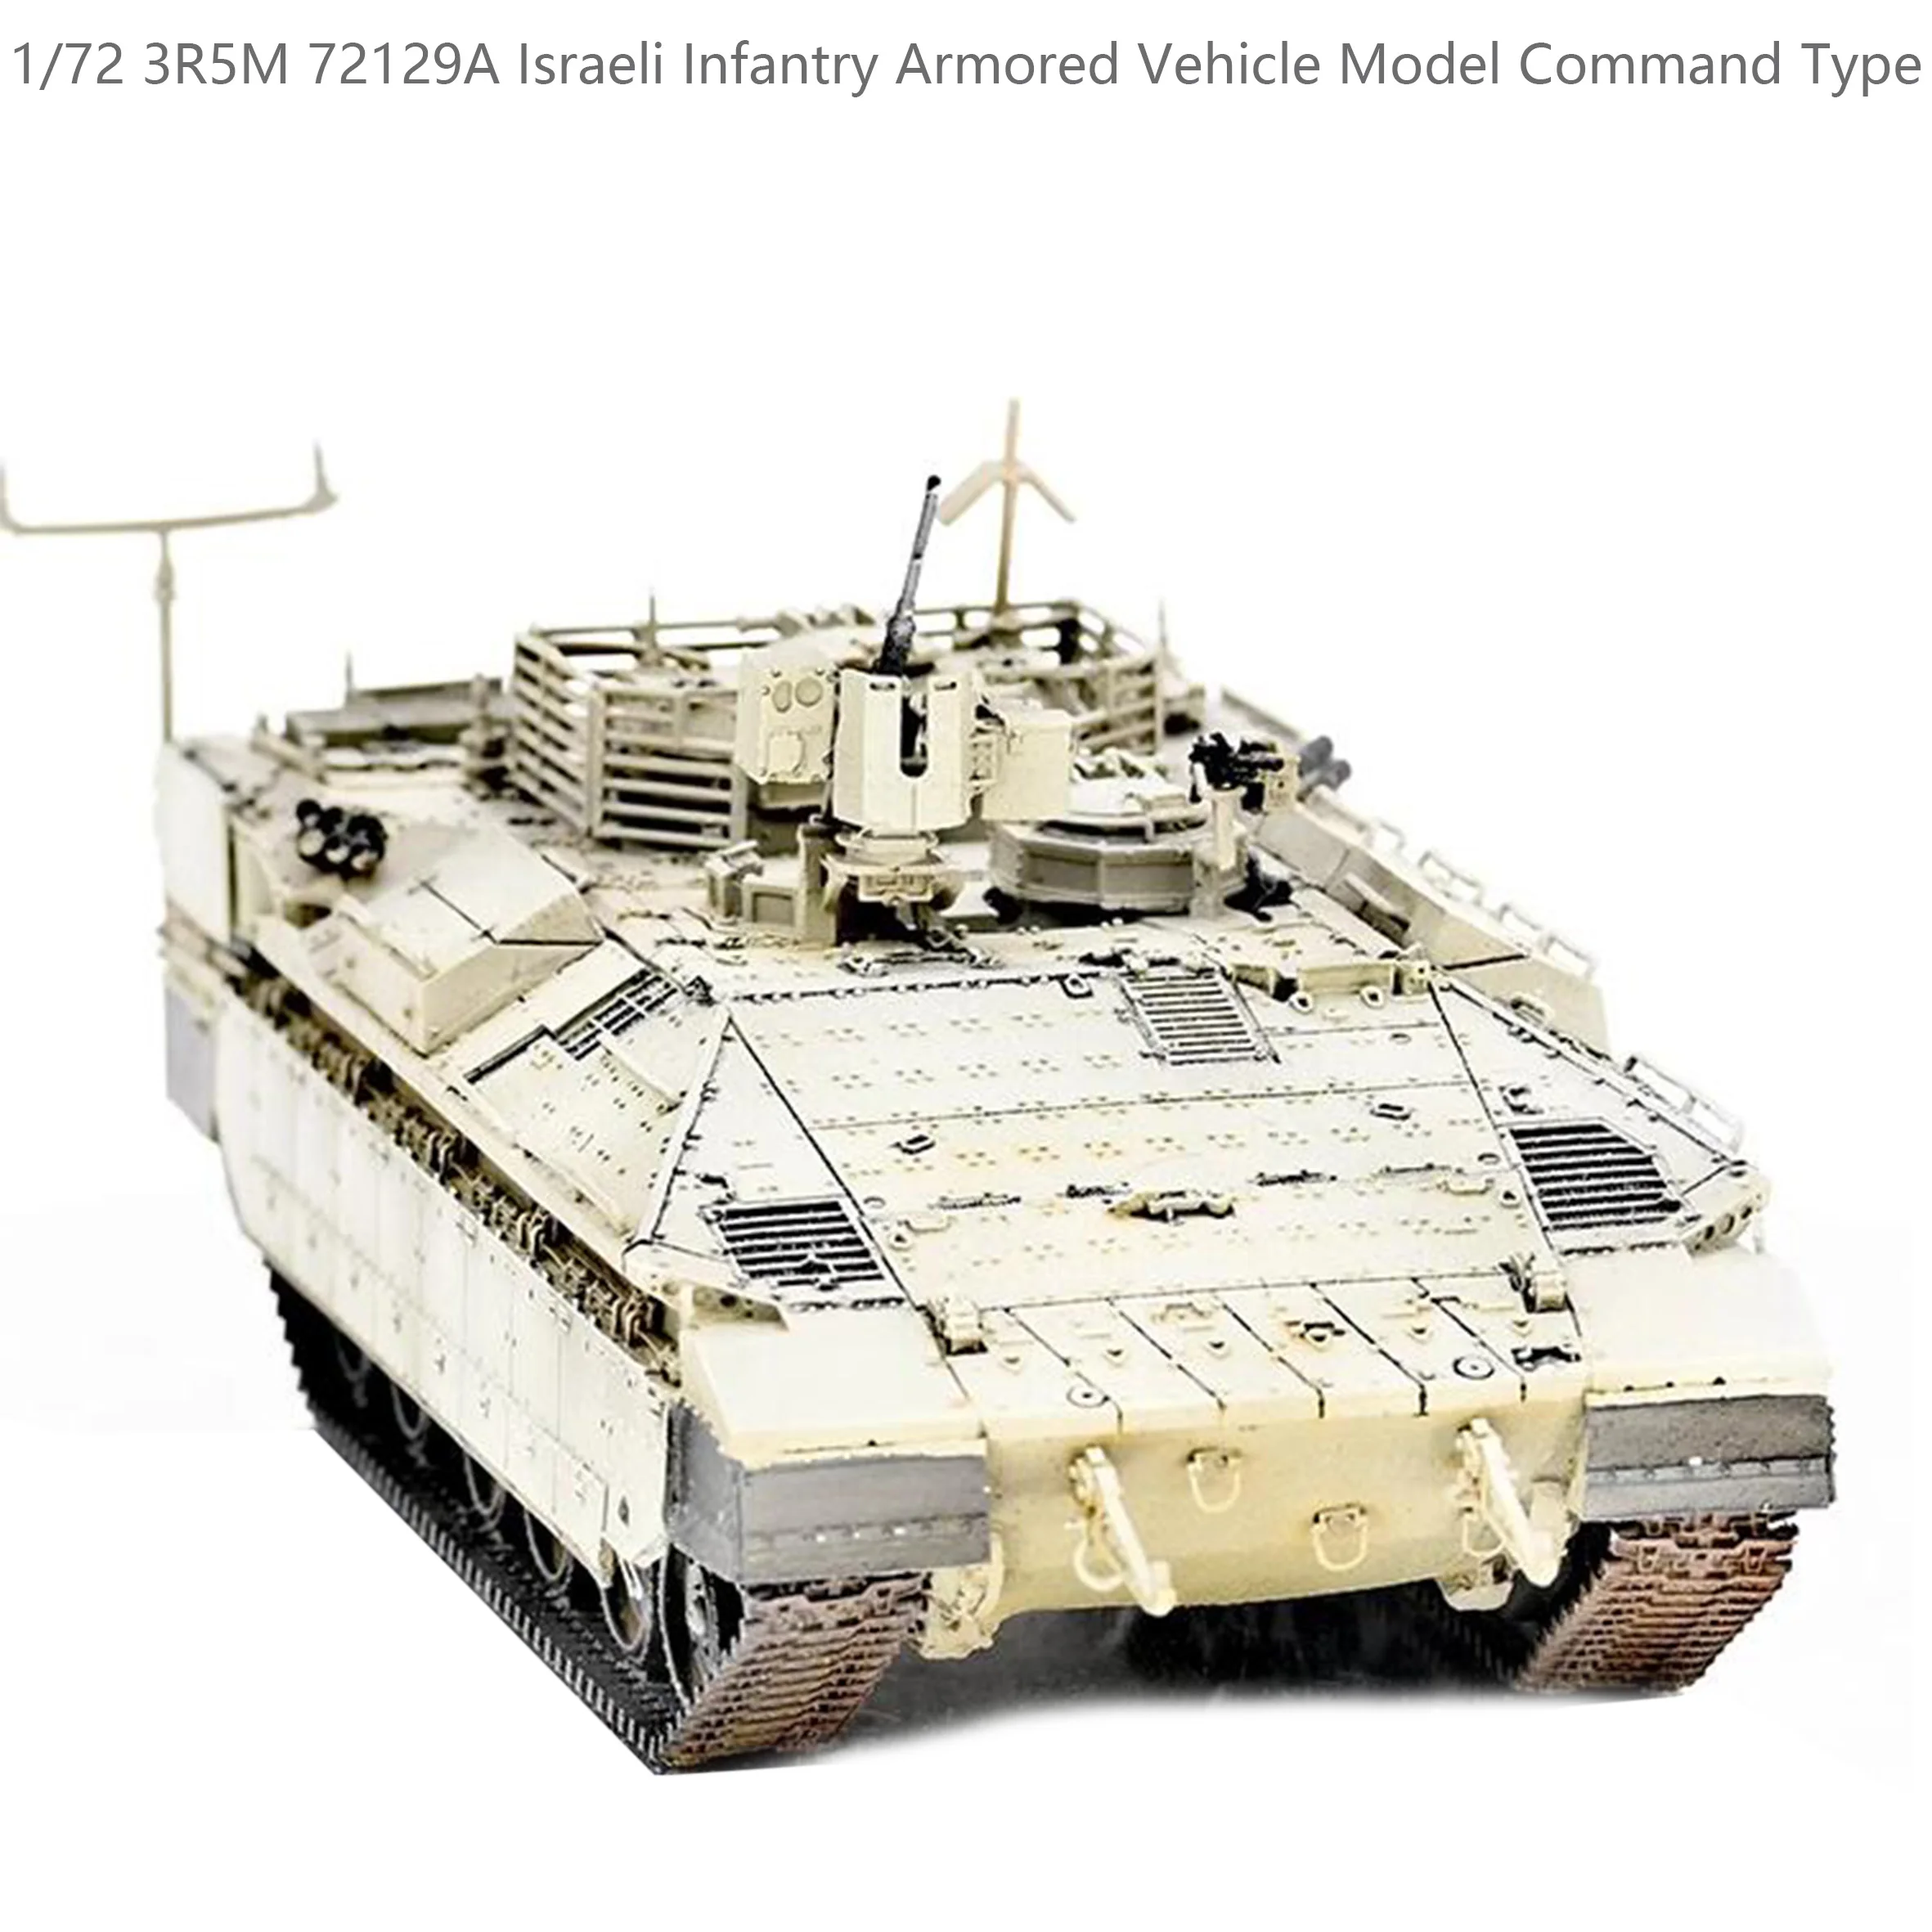 

1/72 3R5M 72129A Israeli Infantry Armored Vehicle Model Command Type Finished product collection model